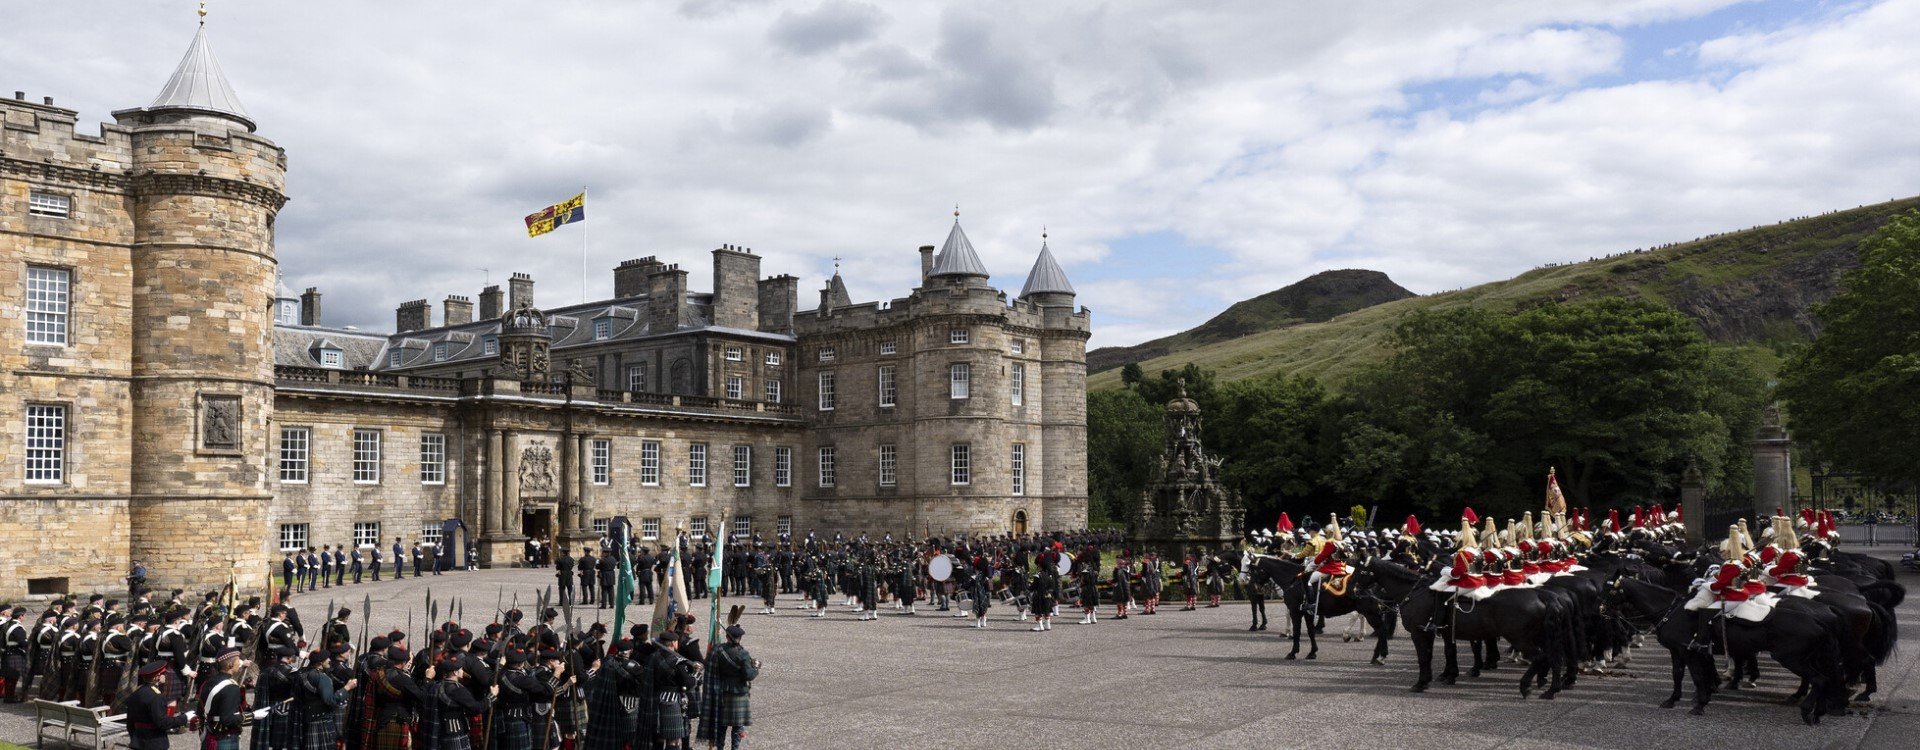 The King's Parade at the Palace of Holyroodhouse